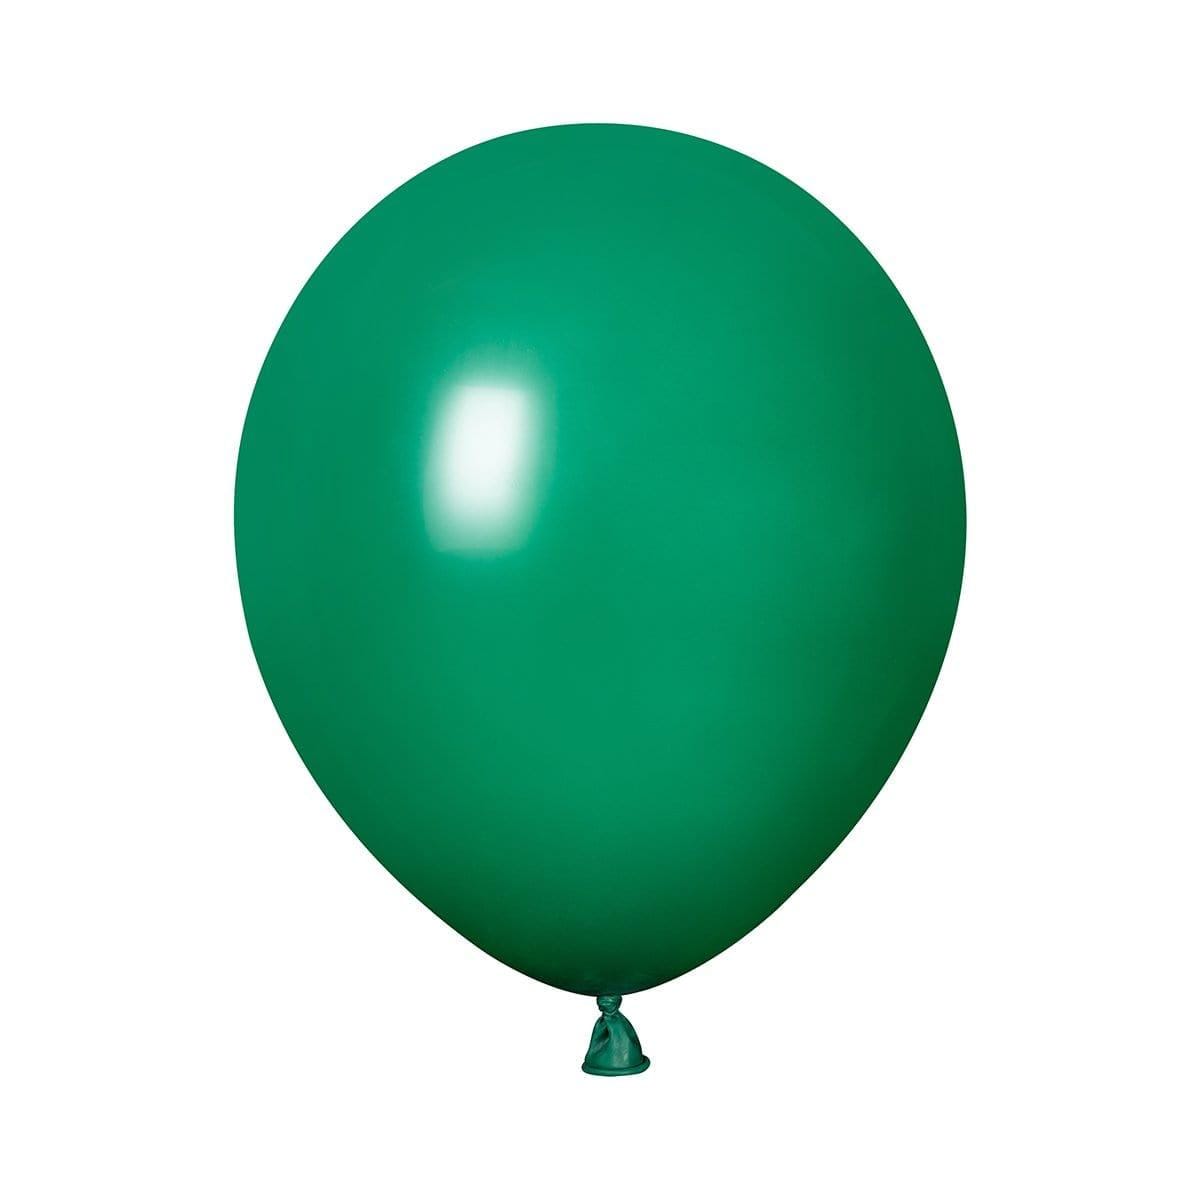 Buy Balloons Festive Green Latex Balloon 5 Inches, 100 Count sold at Party Expert